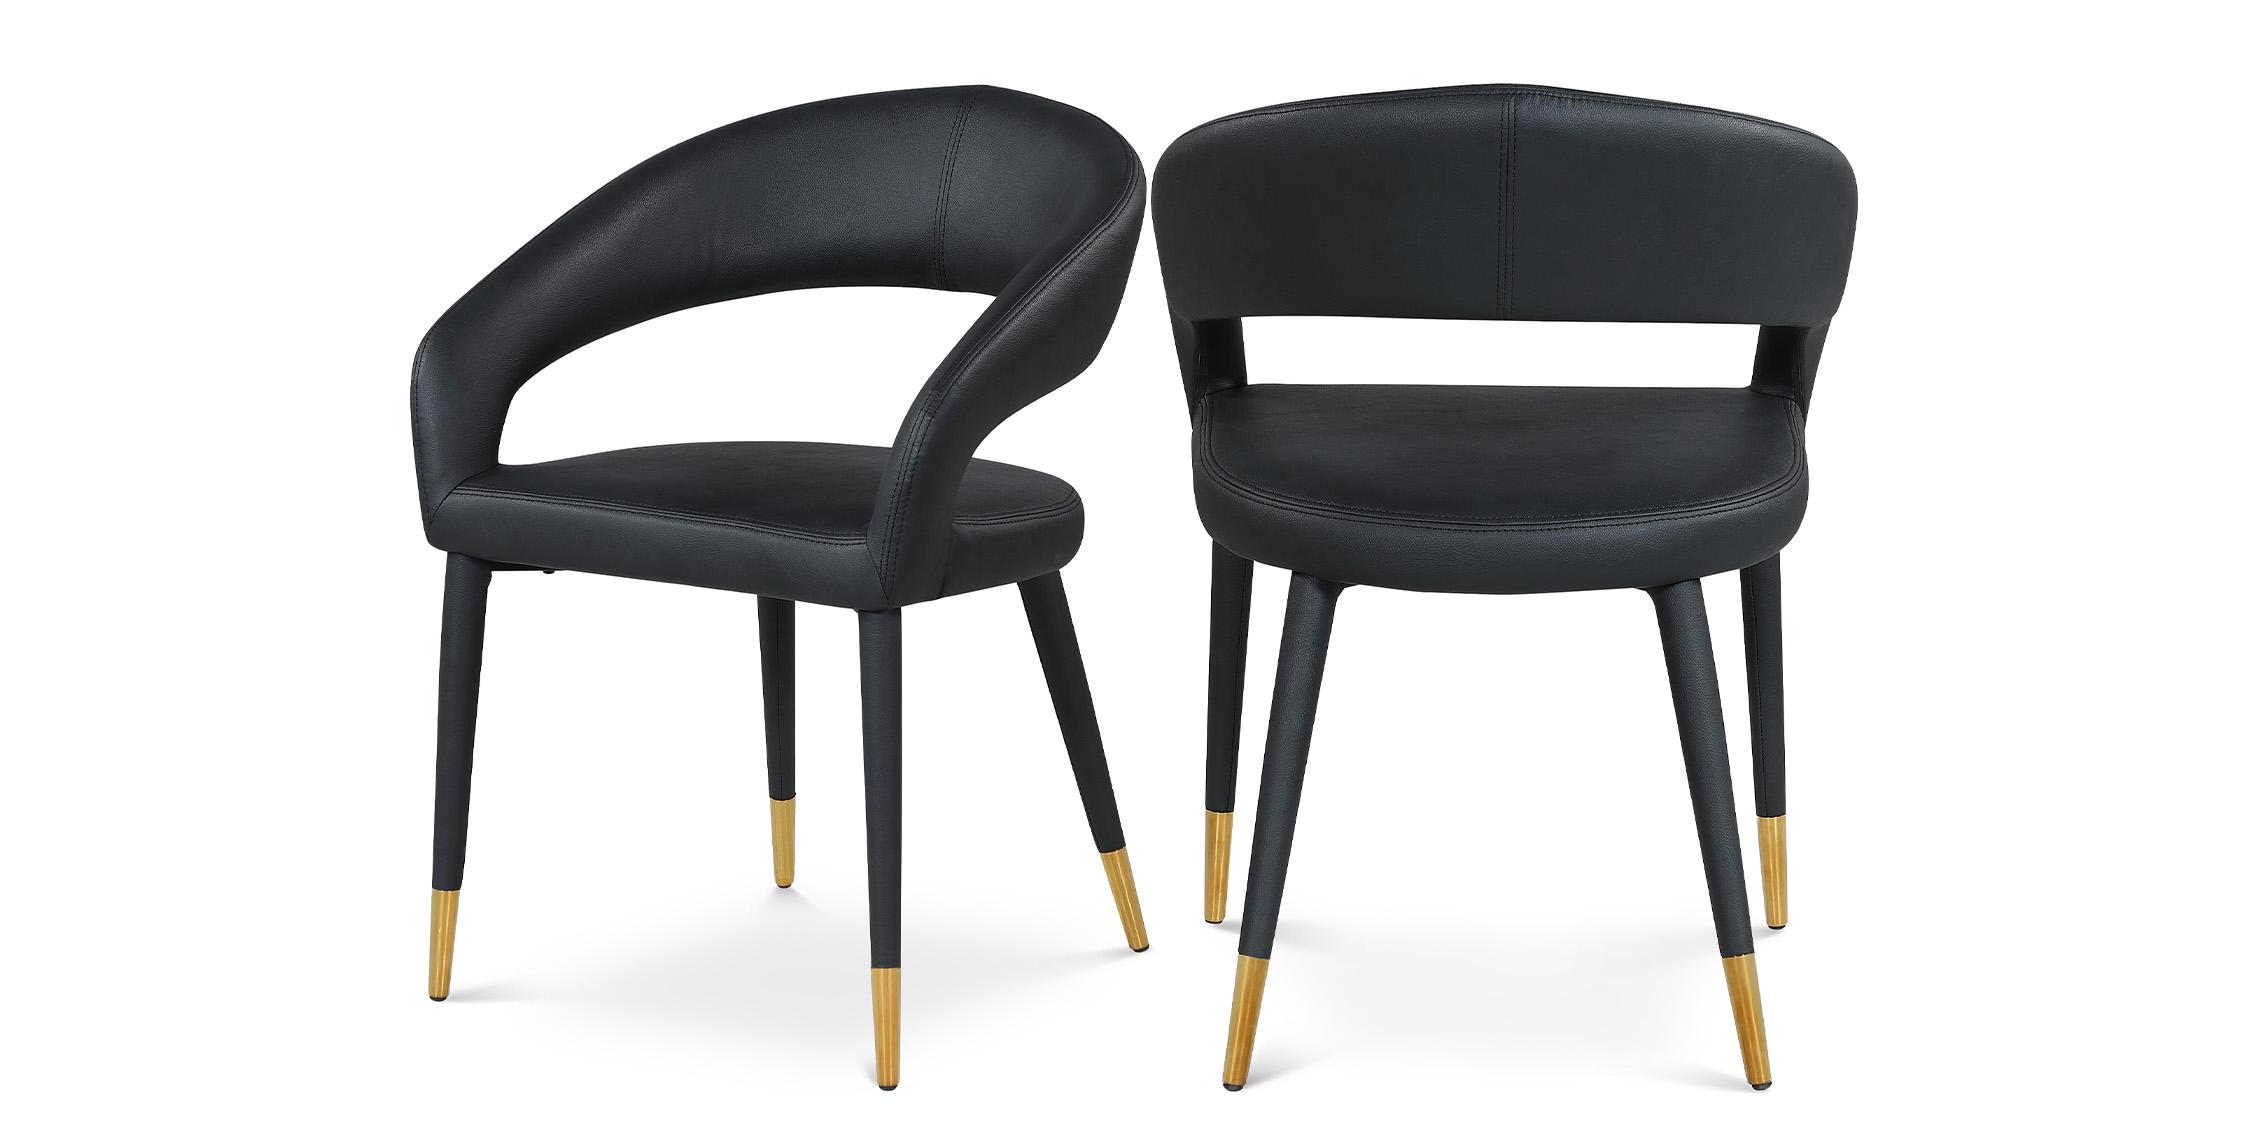 Contemporary, Modern Dining Chair Set DESTINY 538Black-C 538Black-C-Set-2 in Gold, Black Faux Leather